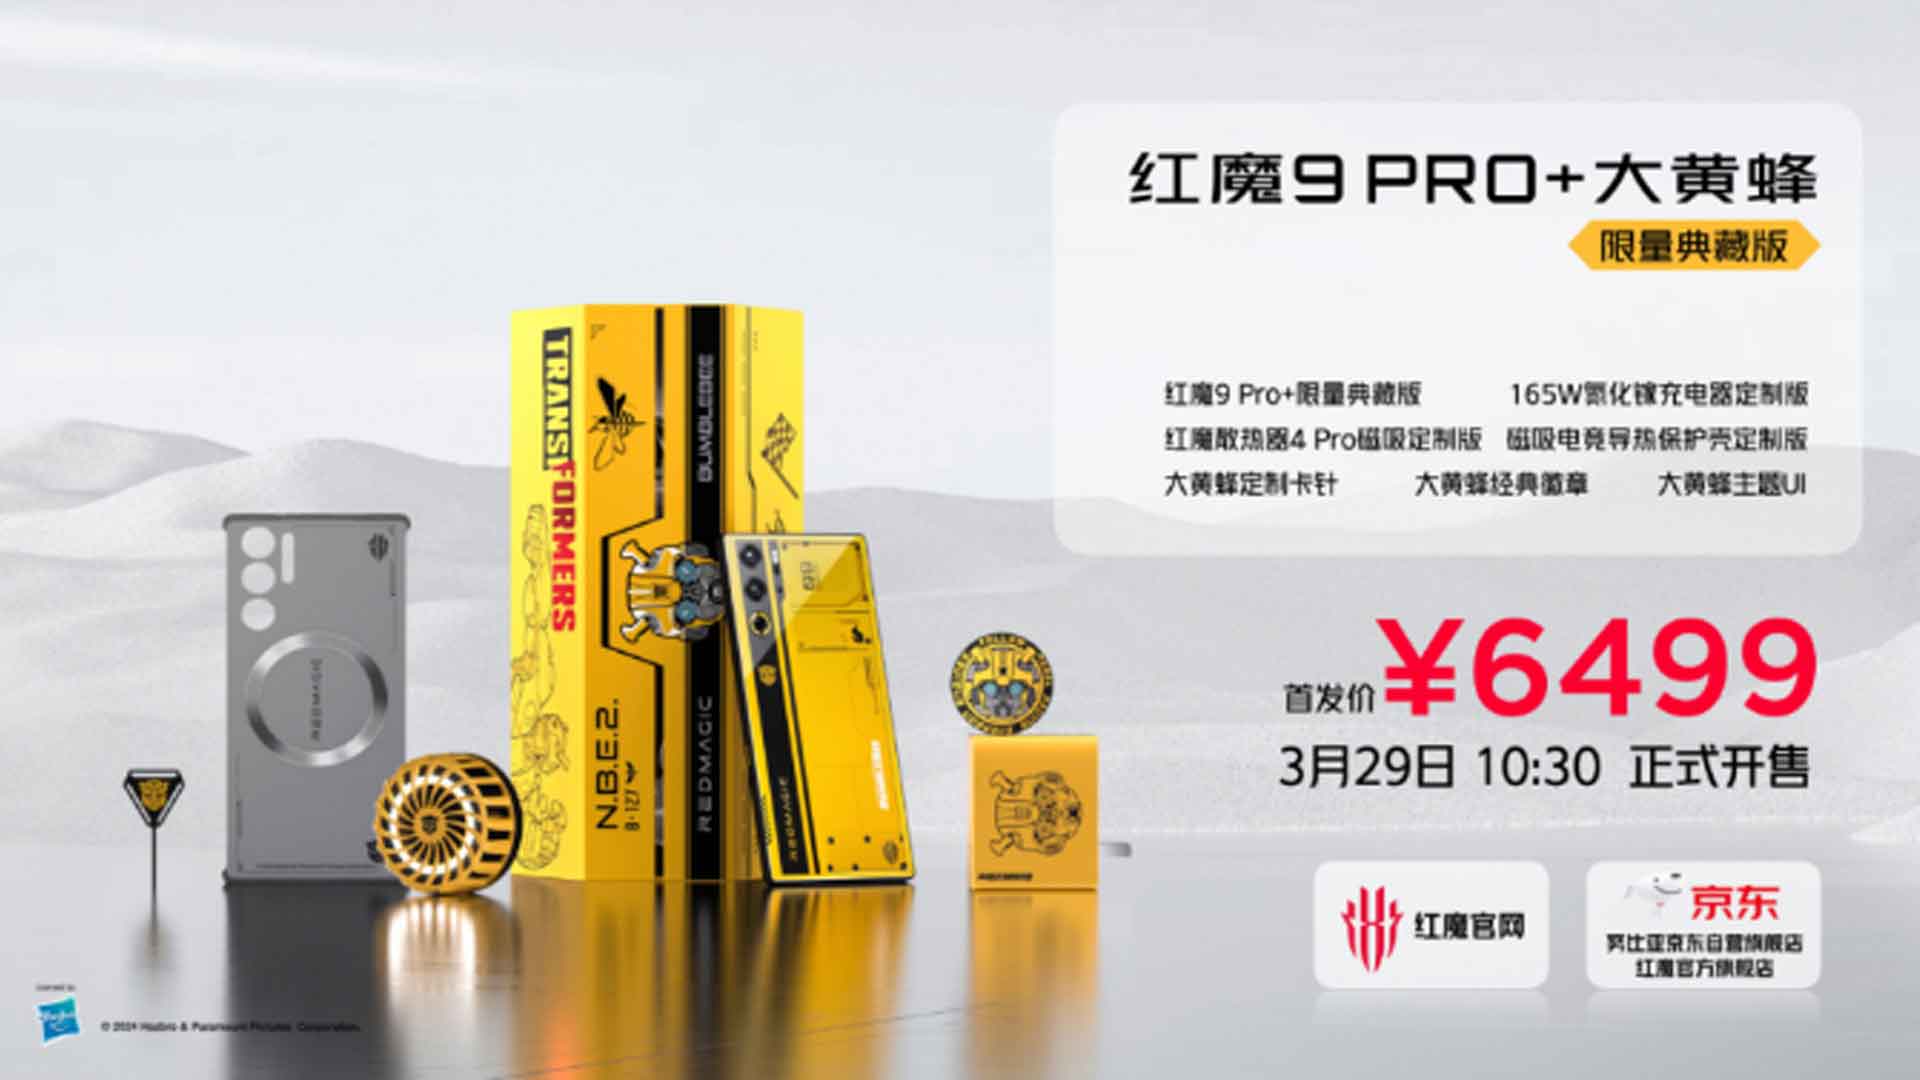 Red Magic 9 Pro+ Bumblebee Edition, Limited Edition Smartphone, Transformers-inspired Phone, Yellow-themed Phone, Carbon Fiber Finish, Bumblebee-themed Software, 16GB RAM, 512GB Storage, China-exclusive Release